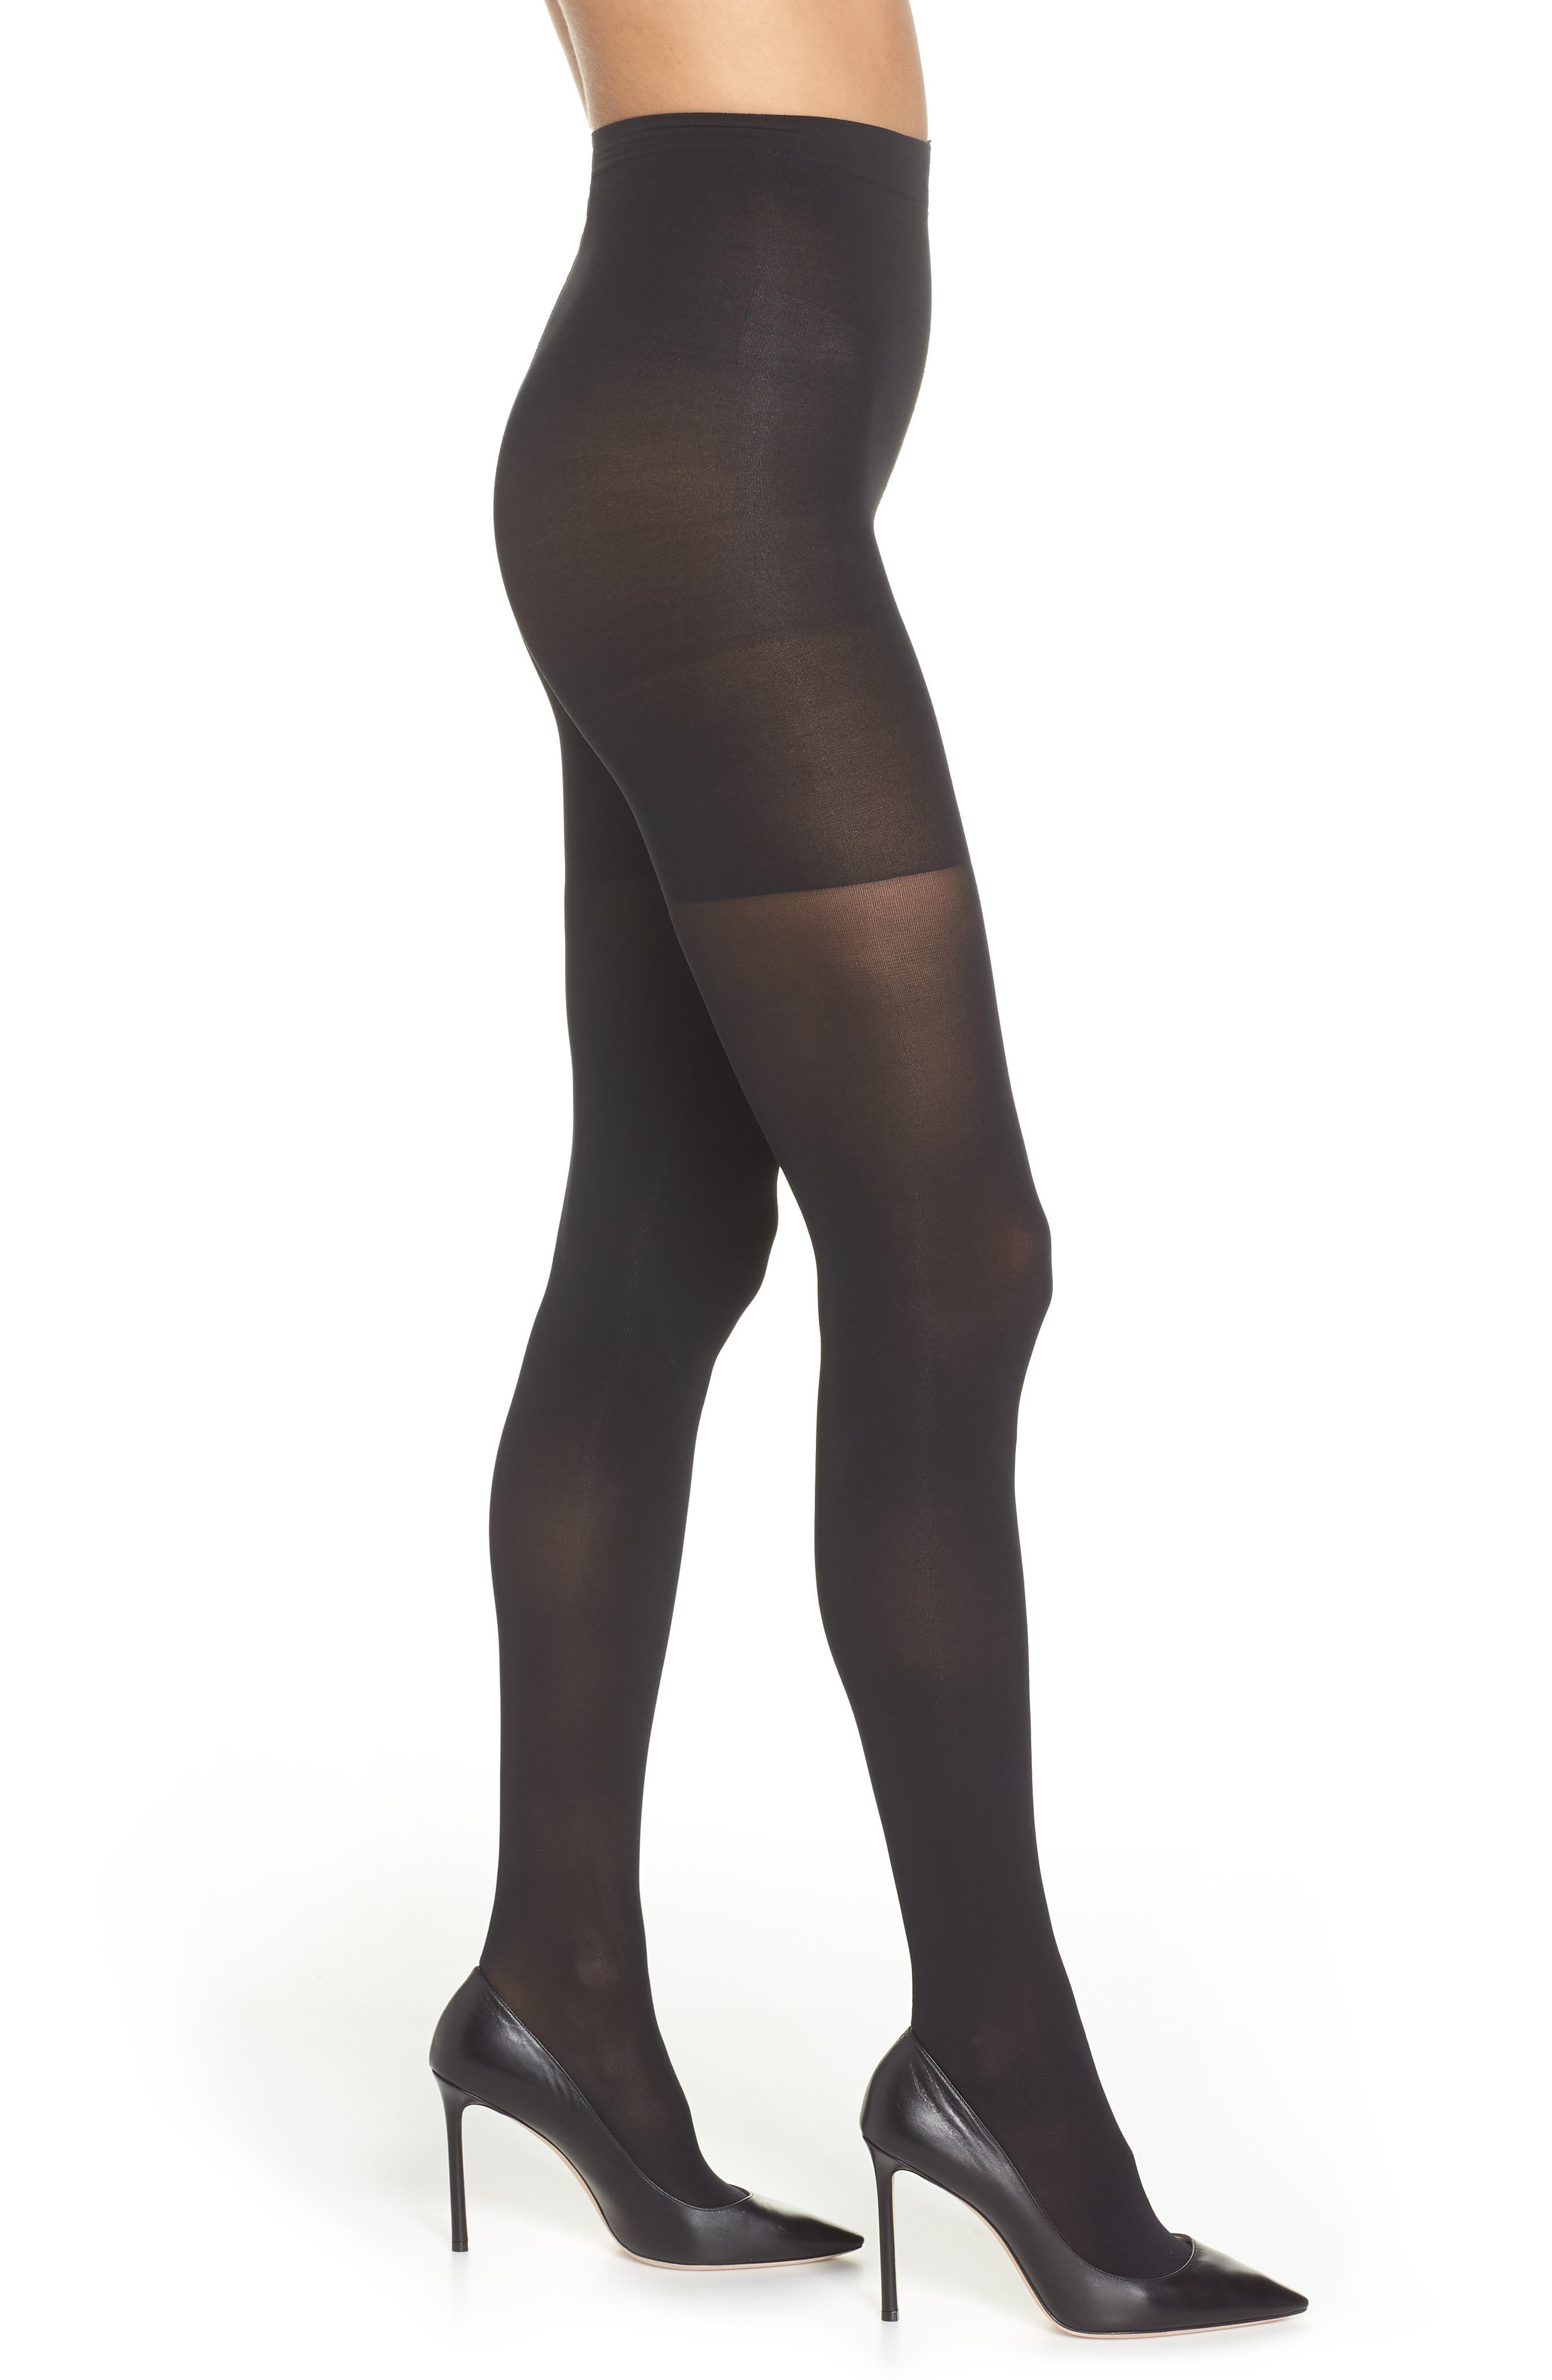 No Nonsense Great Shapes Tights, Opaque Shaping, Size S, Black, Clothing